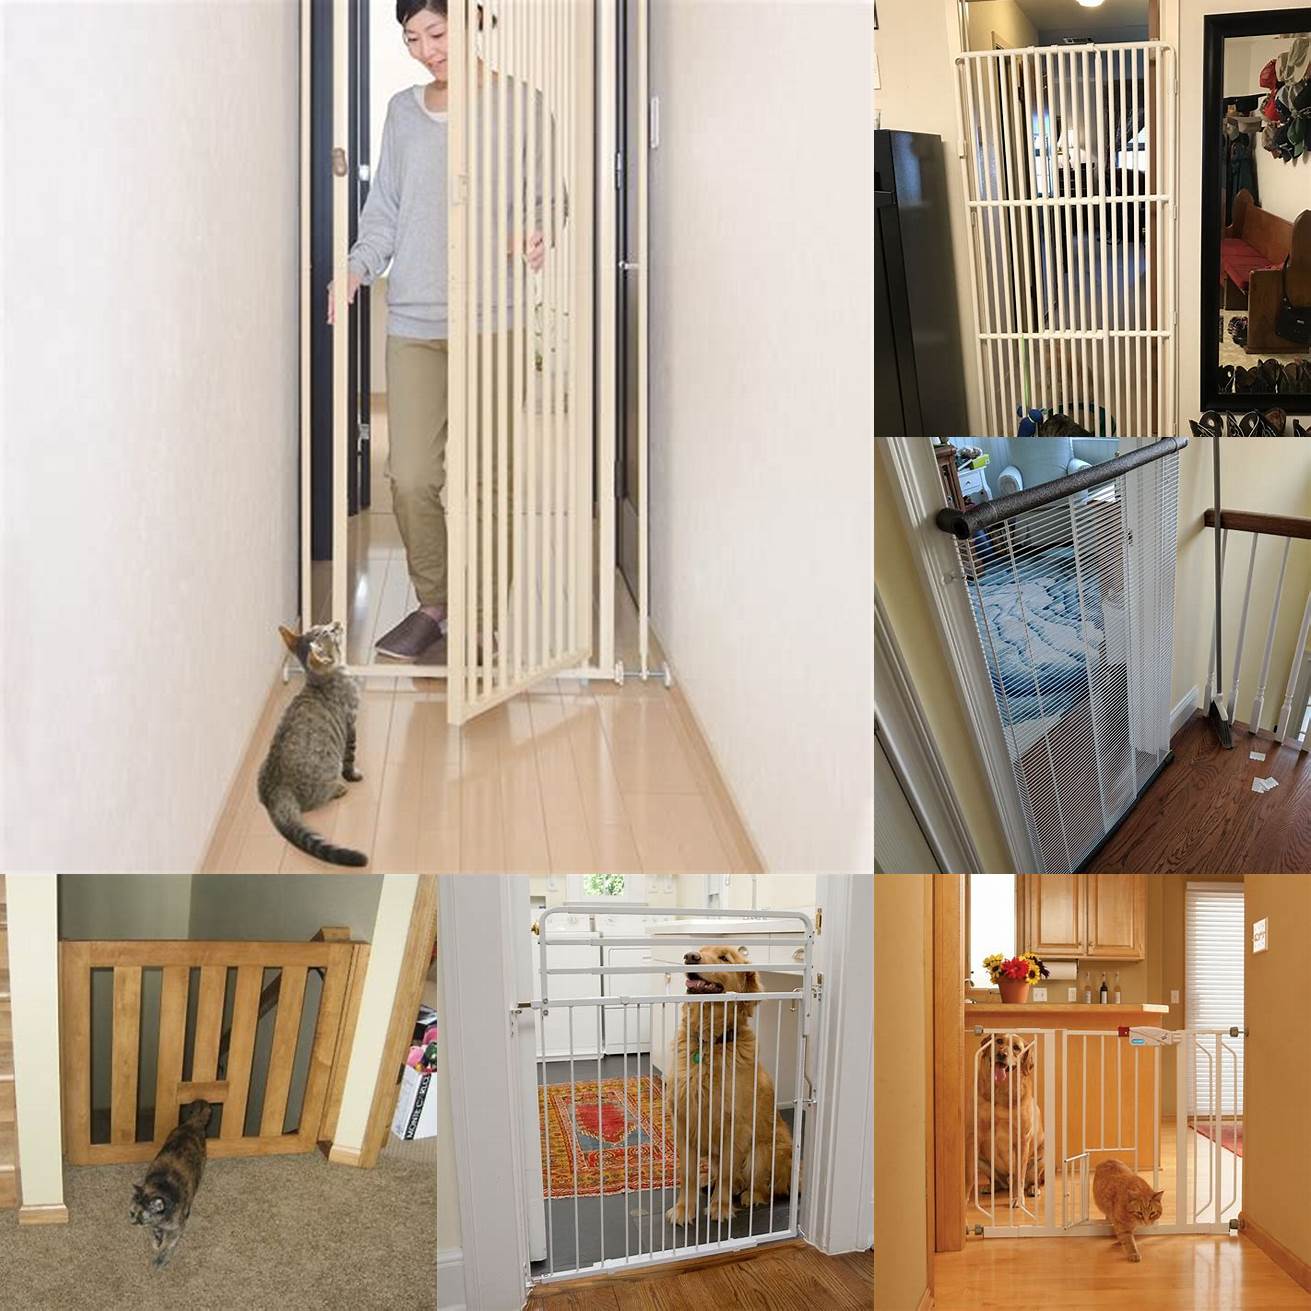 Prevents access to certain areas Cat gates can be used to keep your cat out of certain areas of your home such as the kitchen or bathroom where they could potentially injure themselves